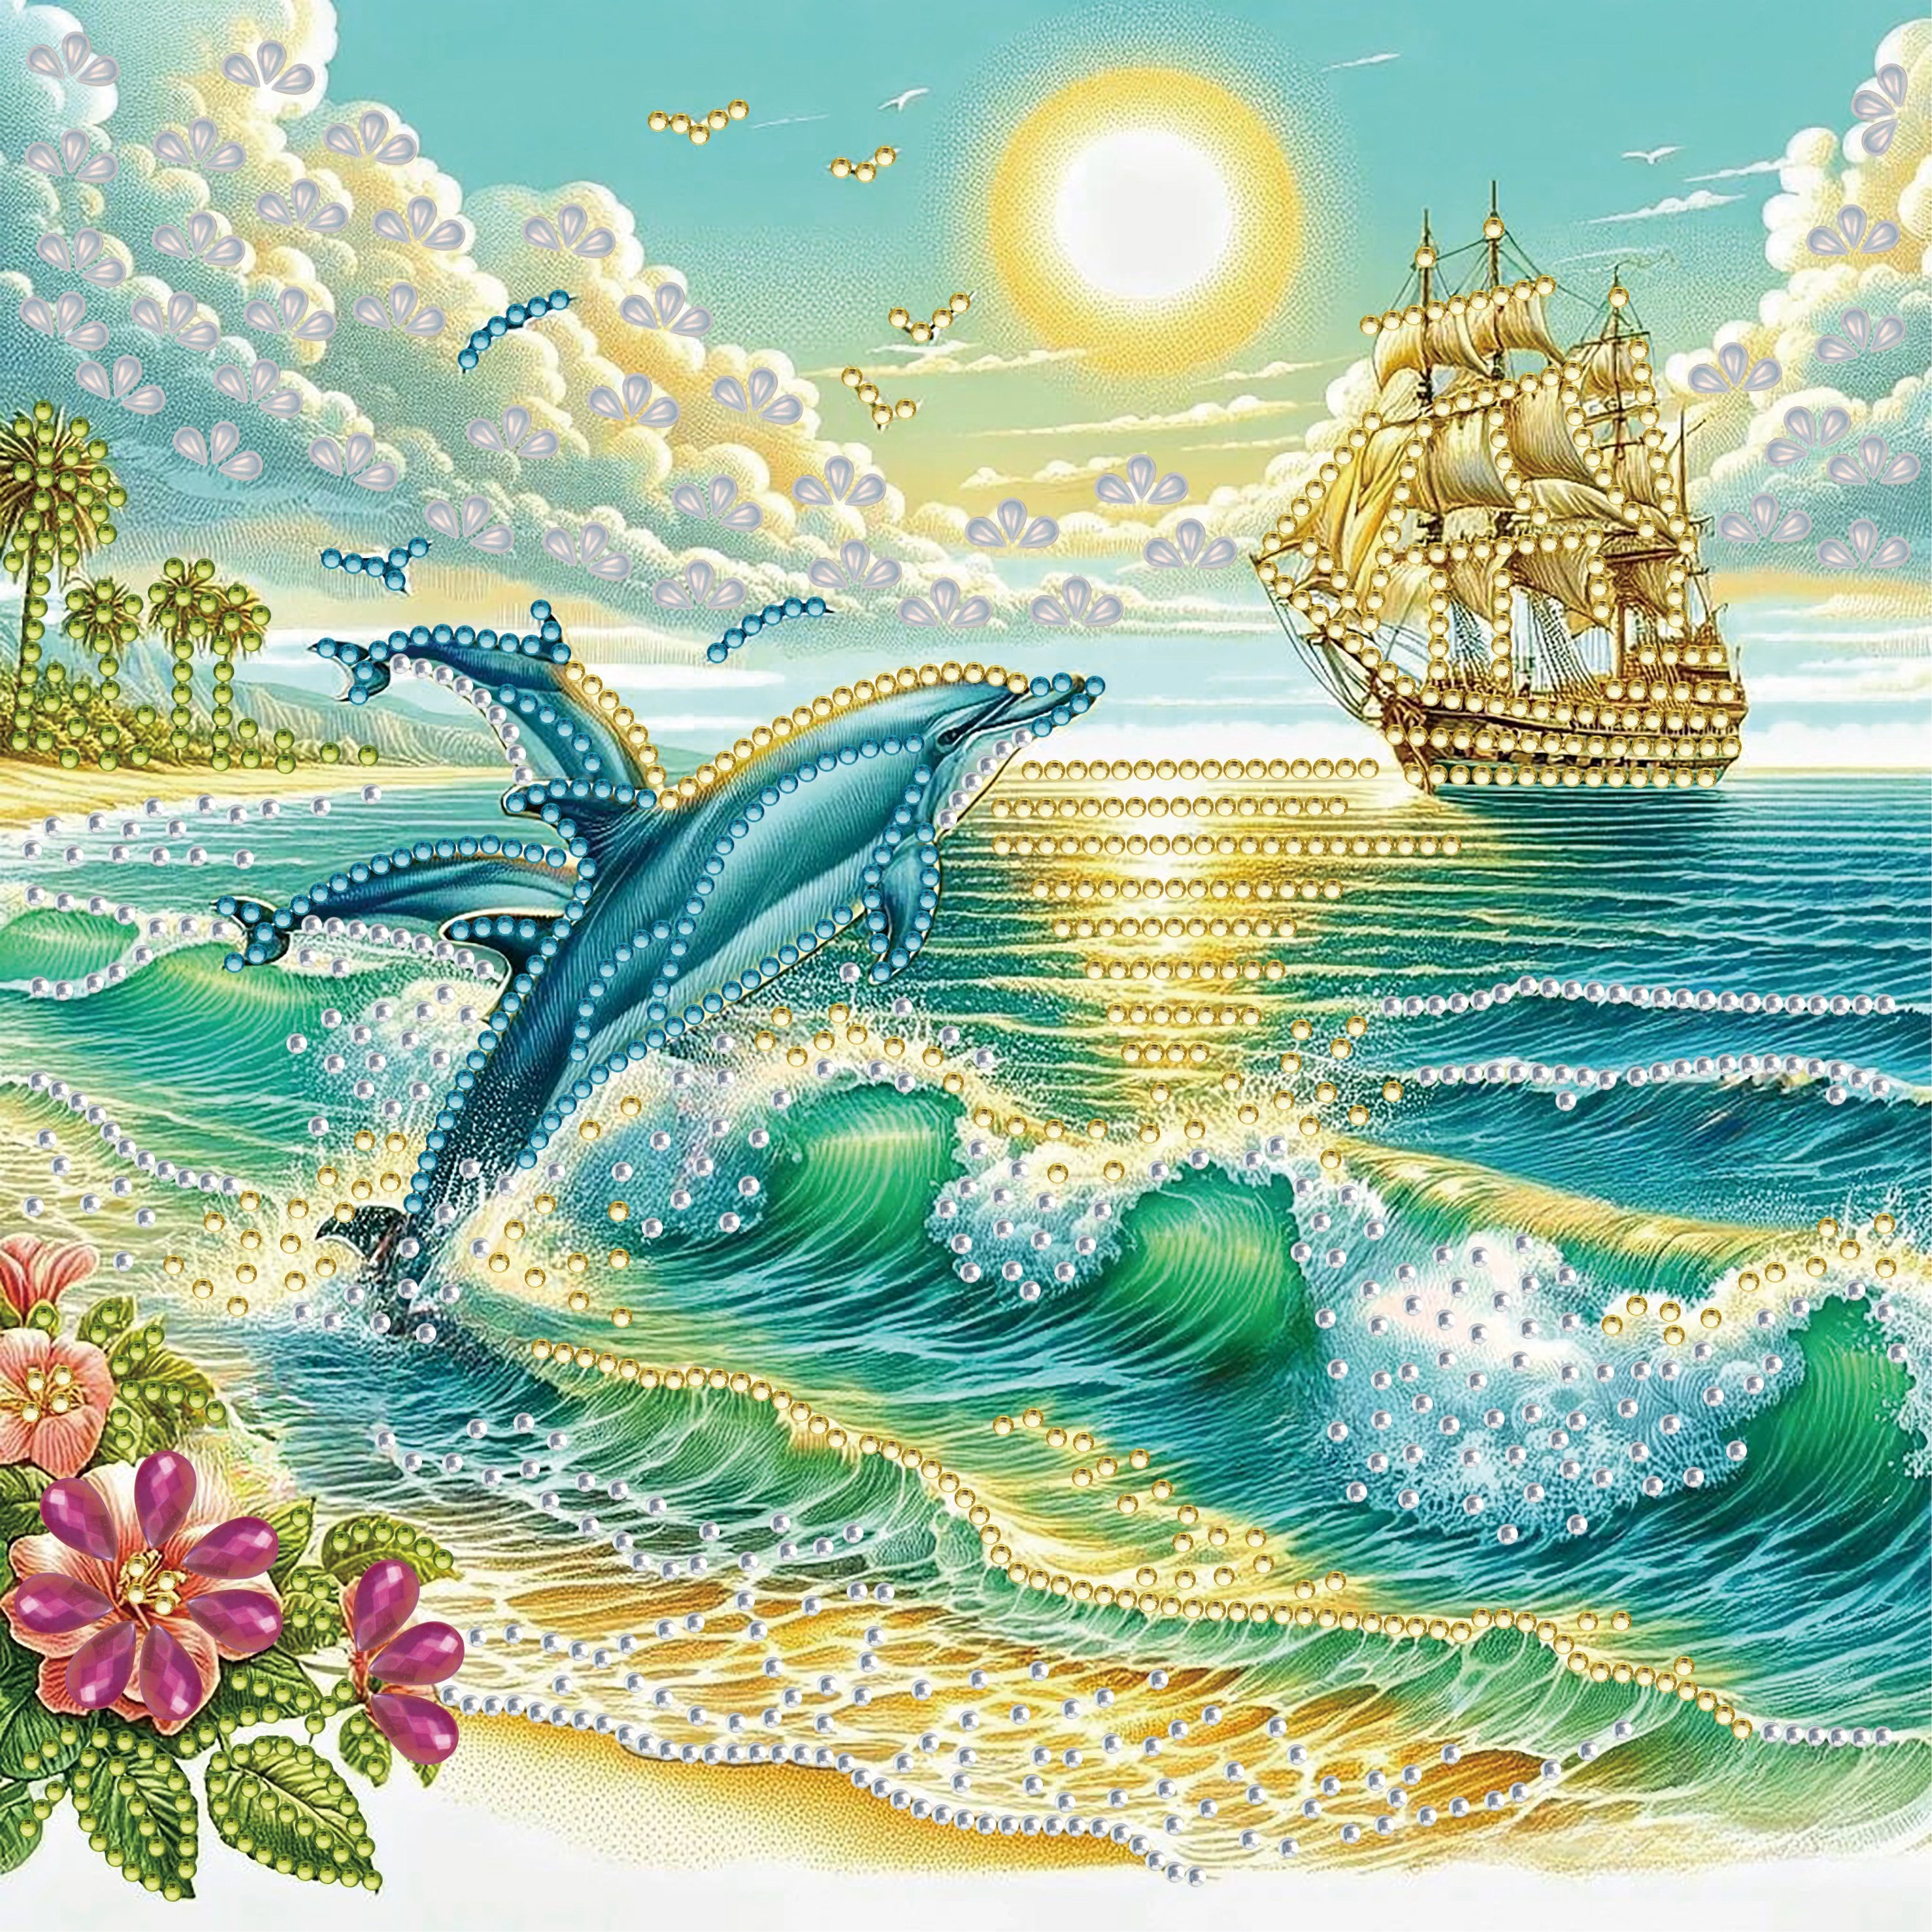 

Dolphin Fishing Boat 5d Diamond Painting Kit - Diy Special Shaped Crystal Embroidery Art, Hanging Mosaic Craft For Home & Garden Decor, Unique Handmade Gift Idea Dolphin Diamond Painting Kits